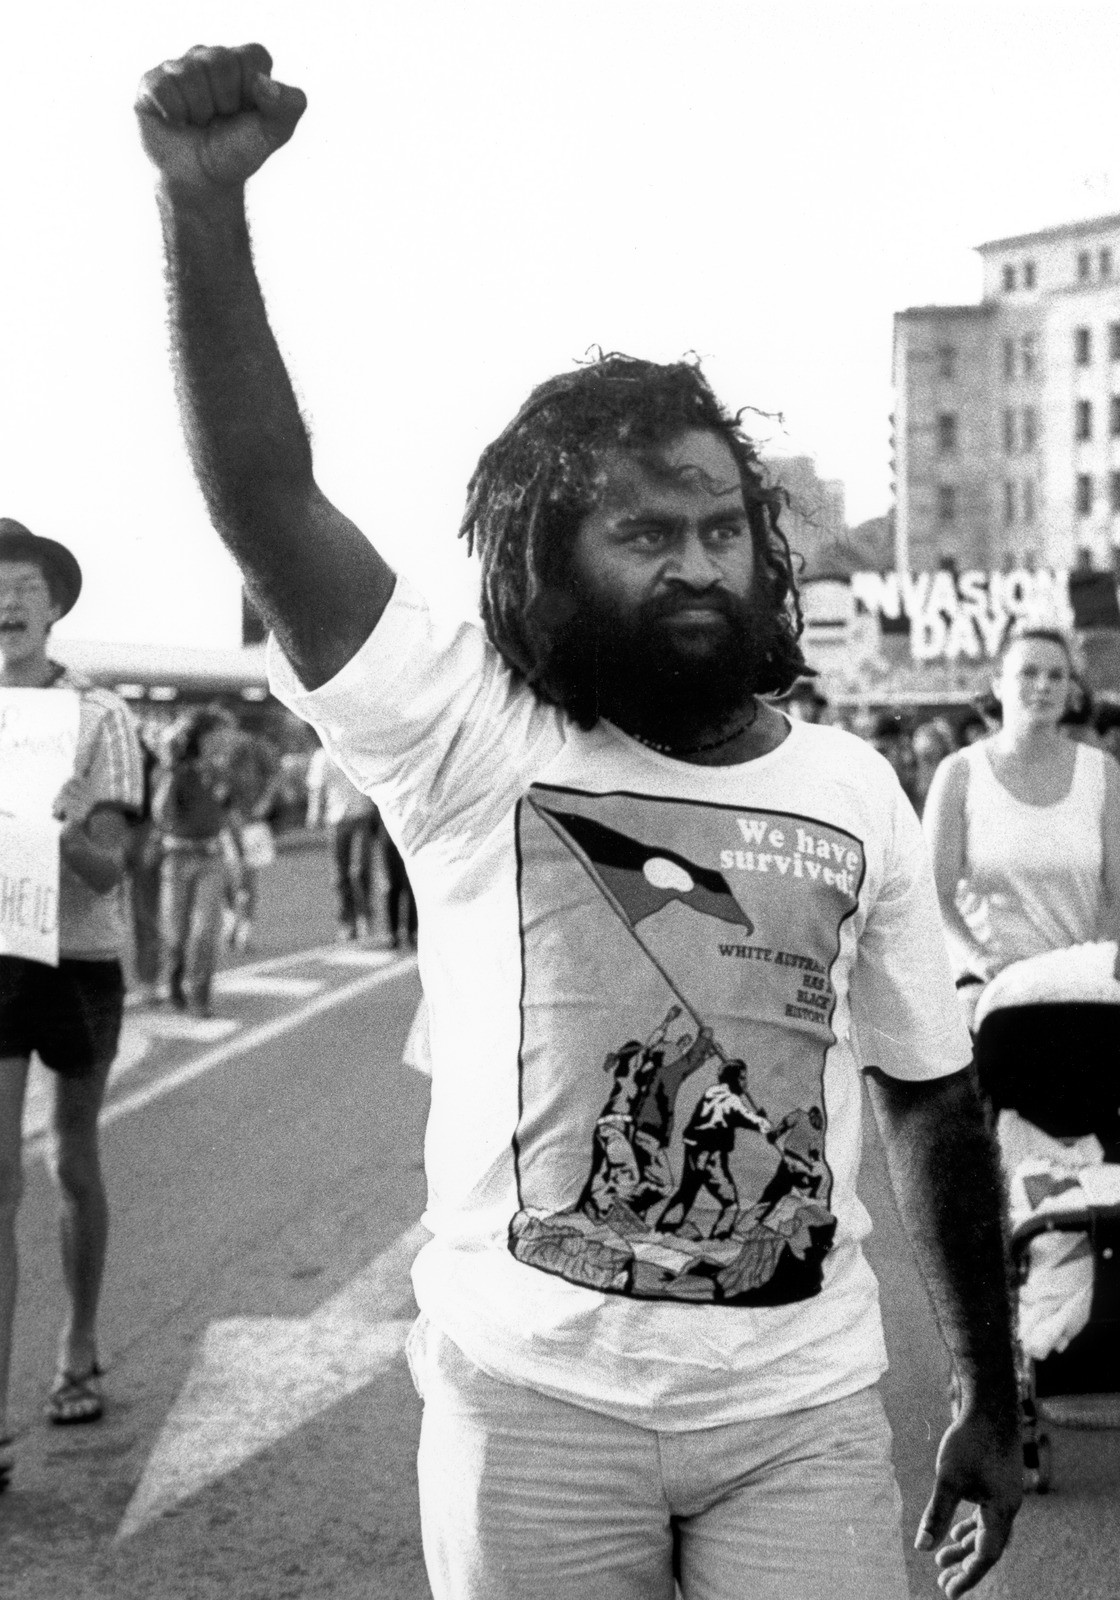 Vincent Brady leading an anti-Bicentenary protest in Brisbane Queensland 1987